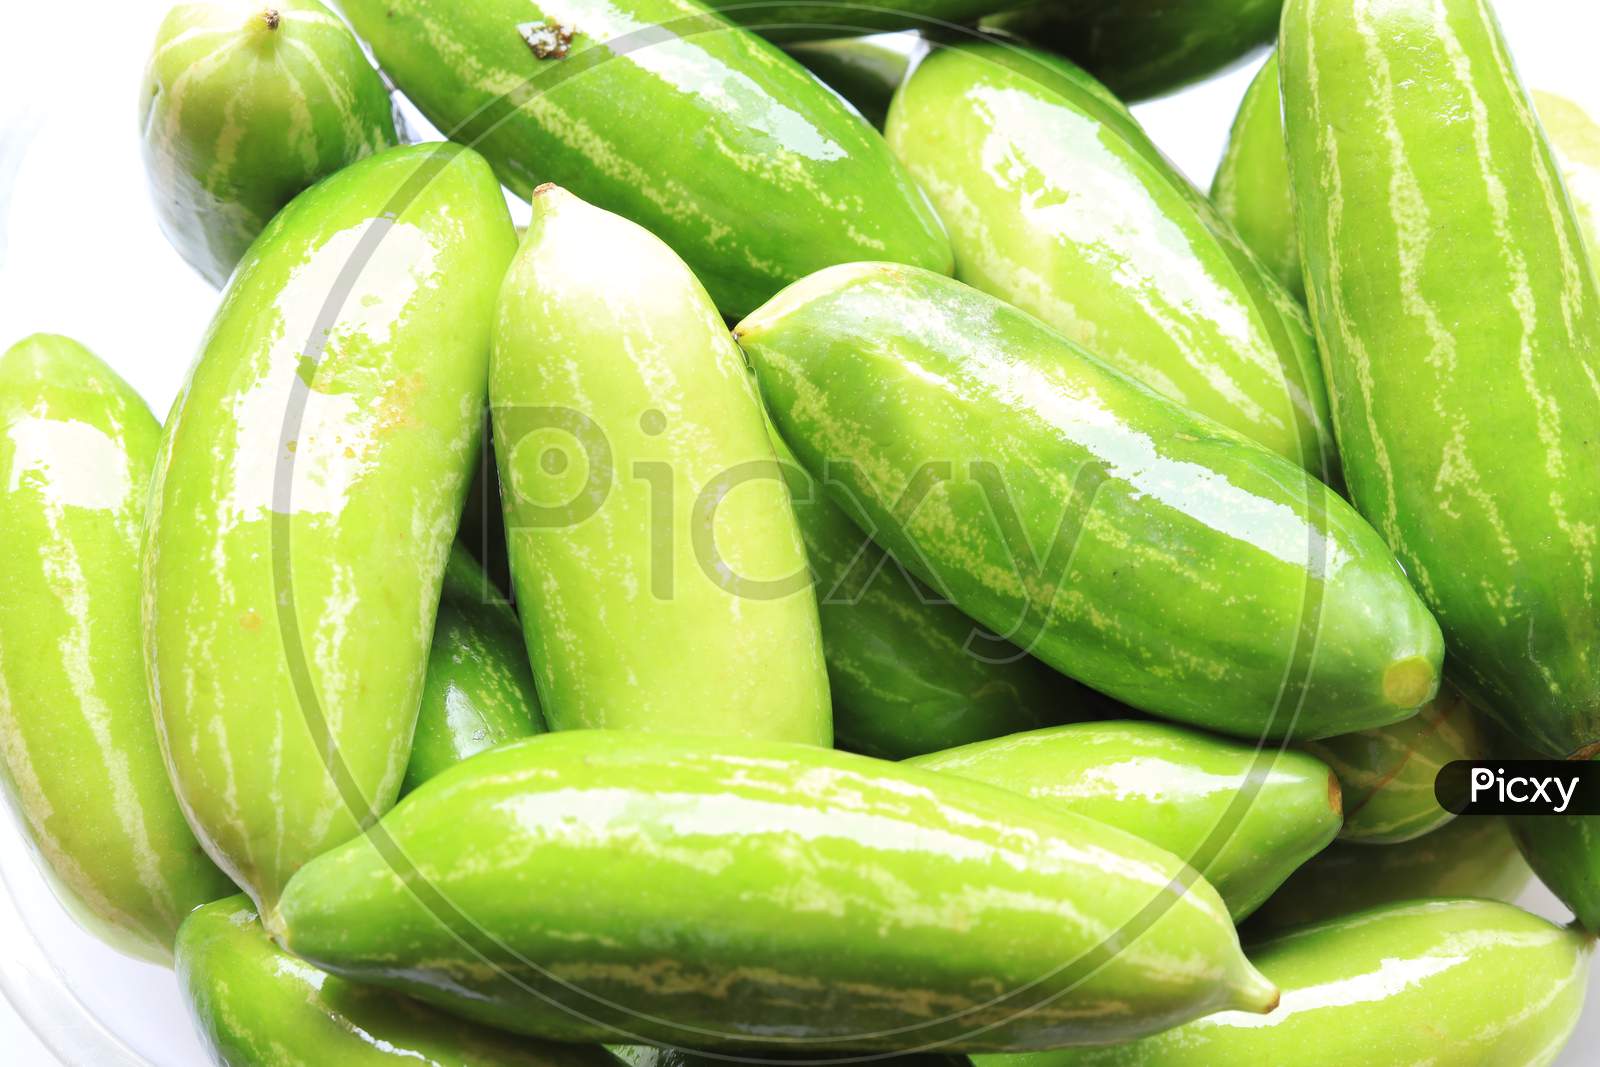 Organic Raw green Coccinia grandis or Ivy gourd on a white background